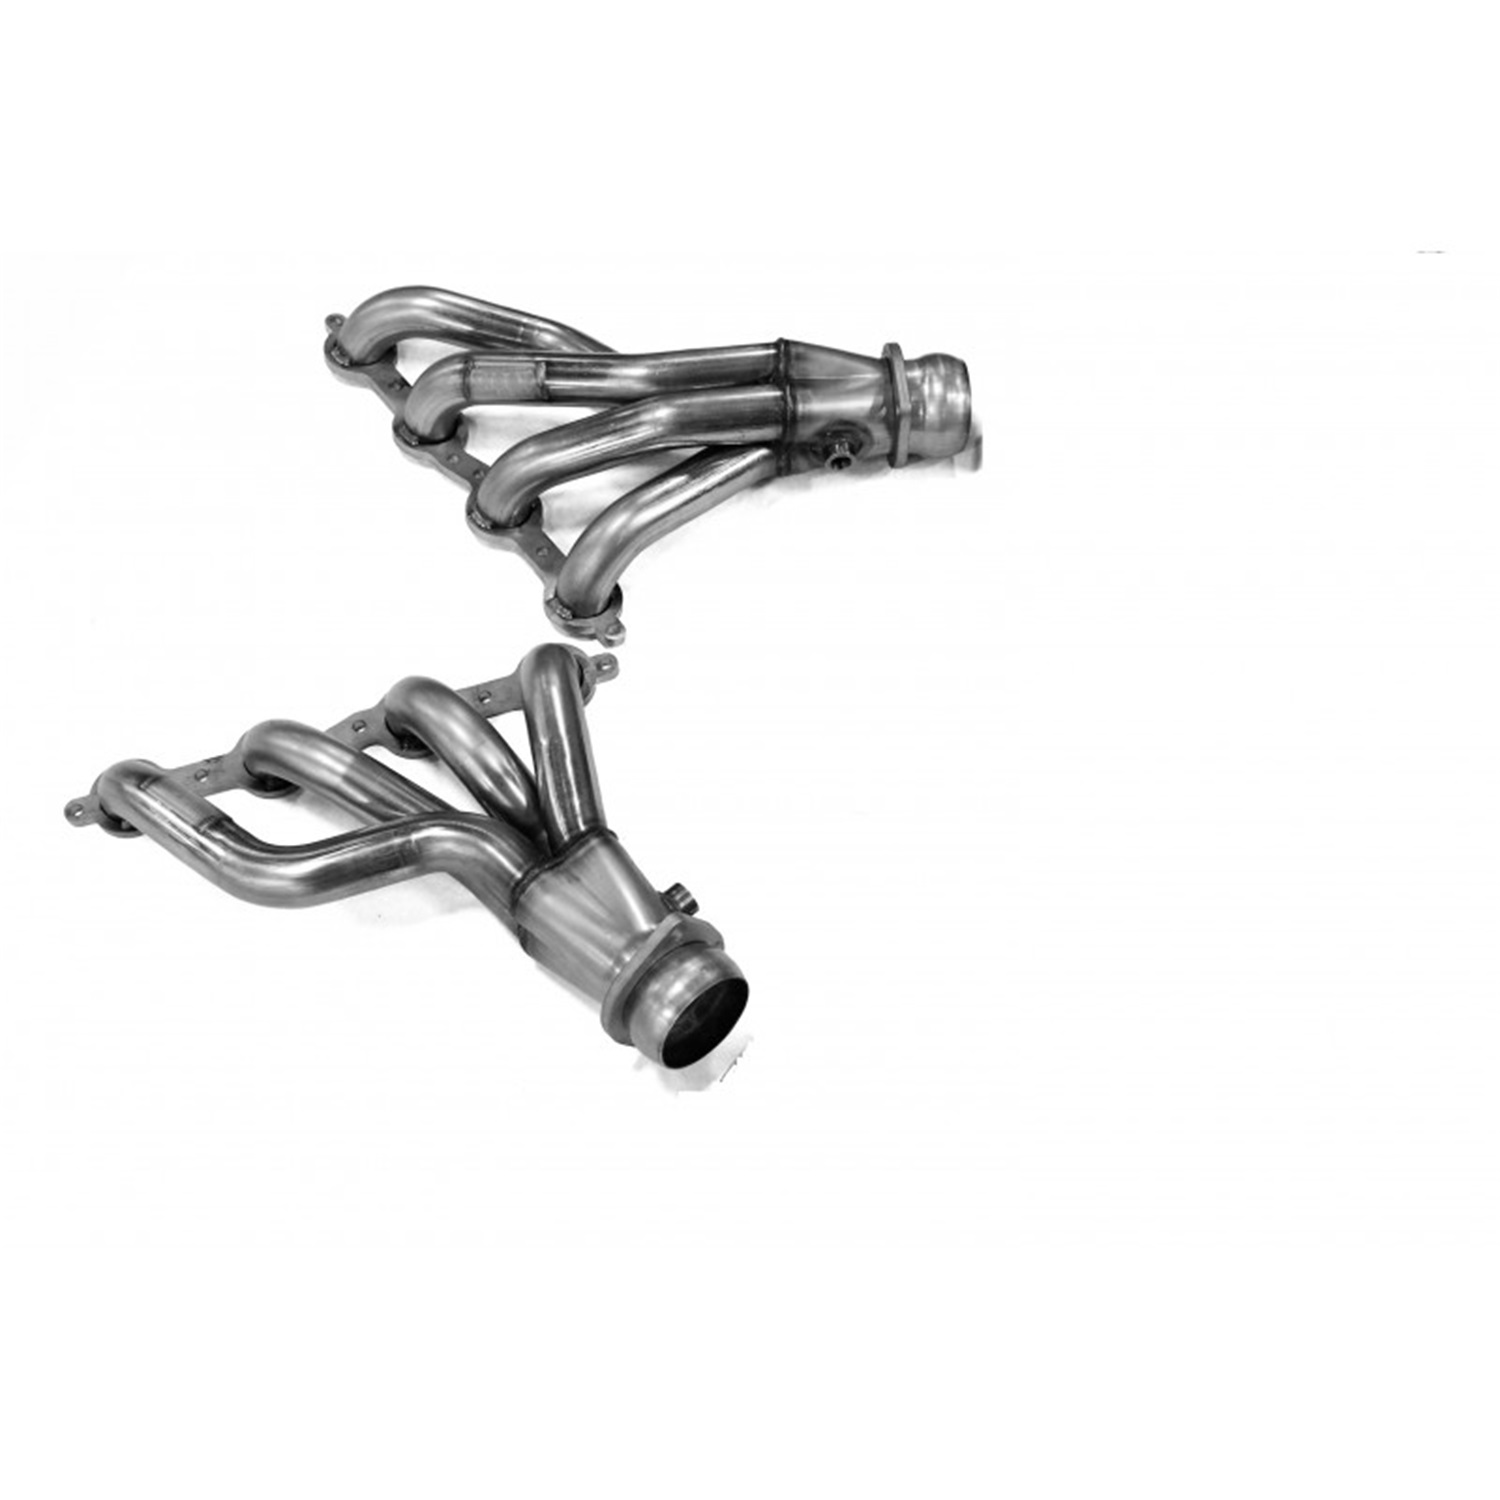 Stainless Steel Headers 1.75 x 3" Mid-Length Collector Incl. Ball And Socket Flange O2 Extensions Available LS Engine Swap